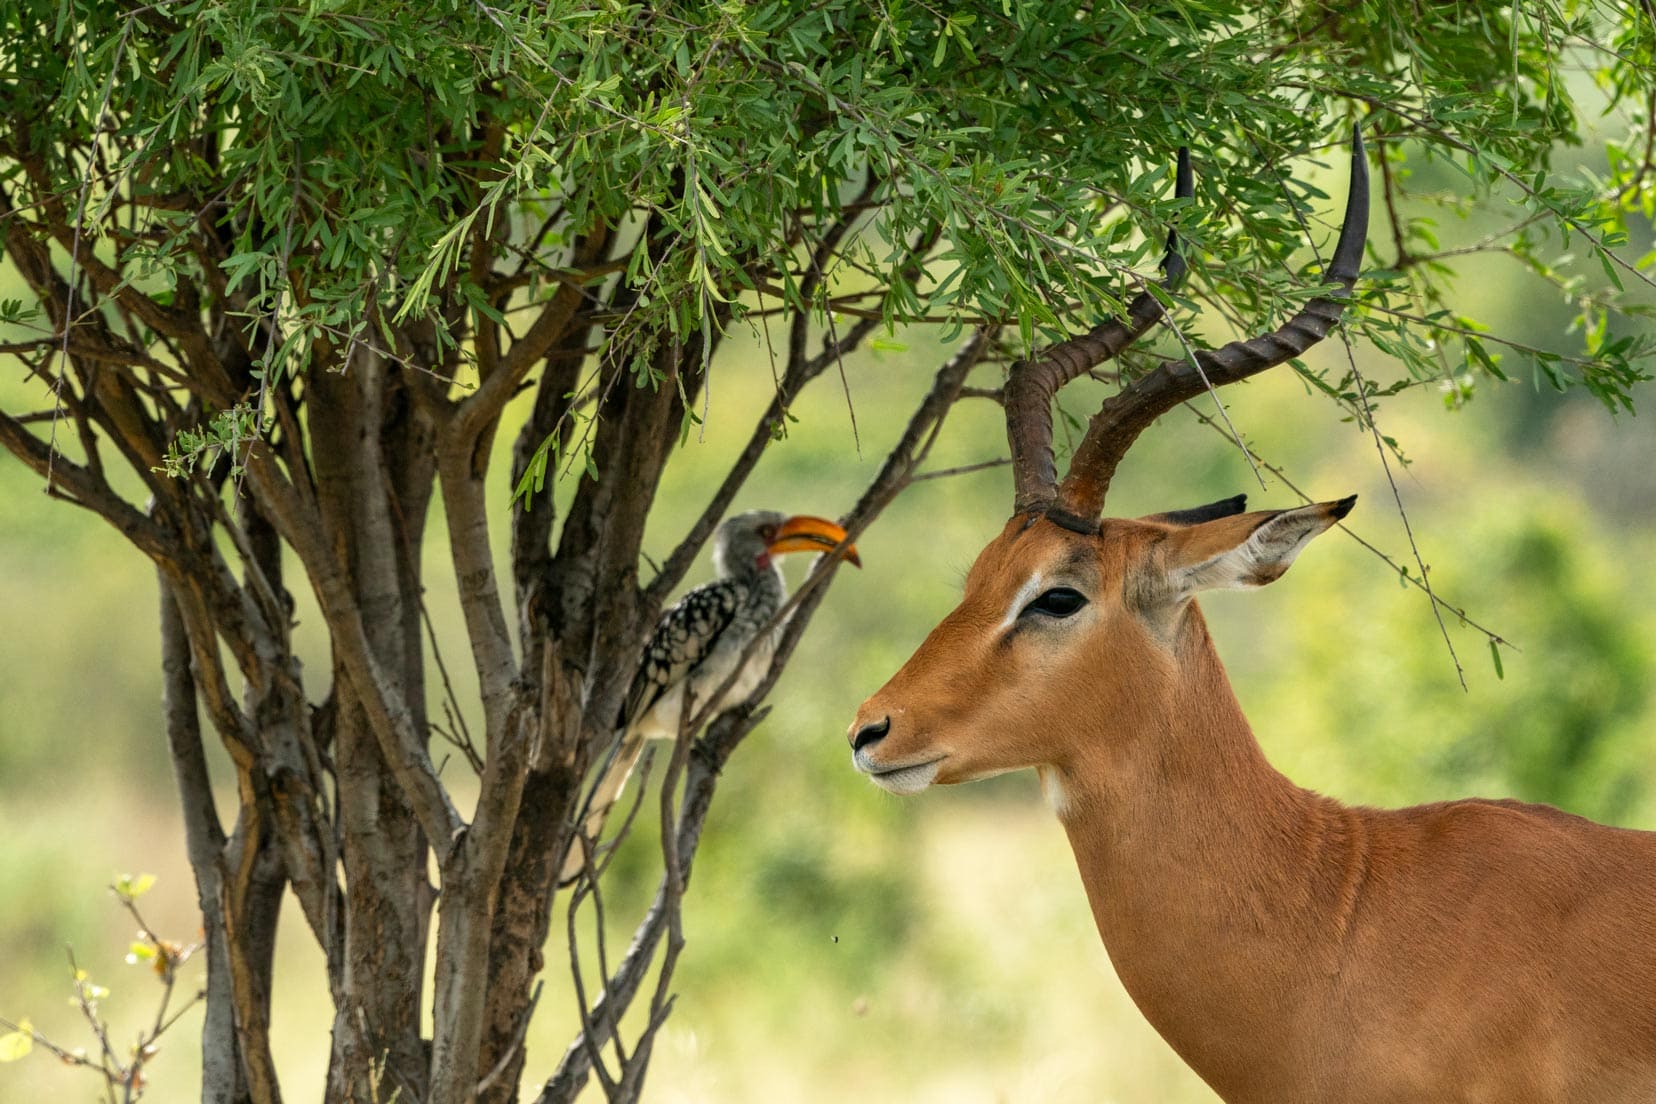 impala by a tree with a hornbill in the distance